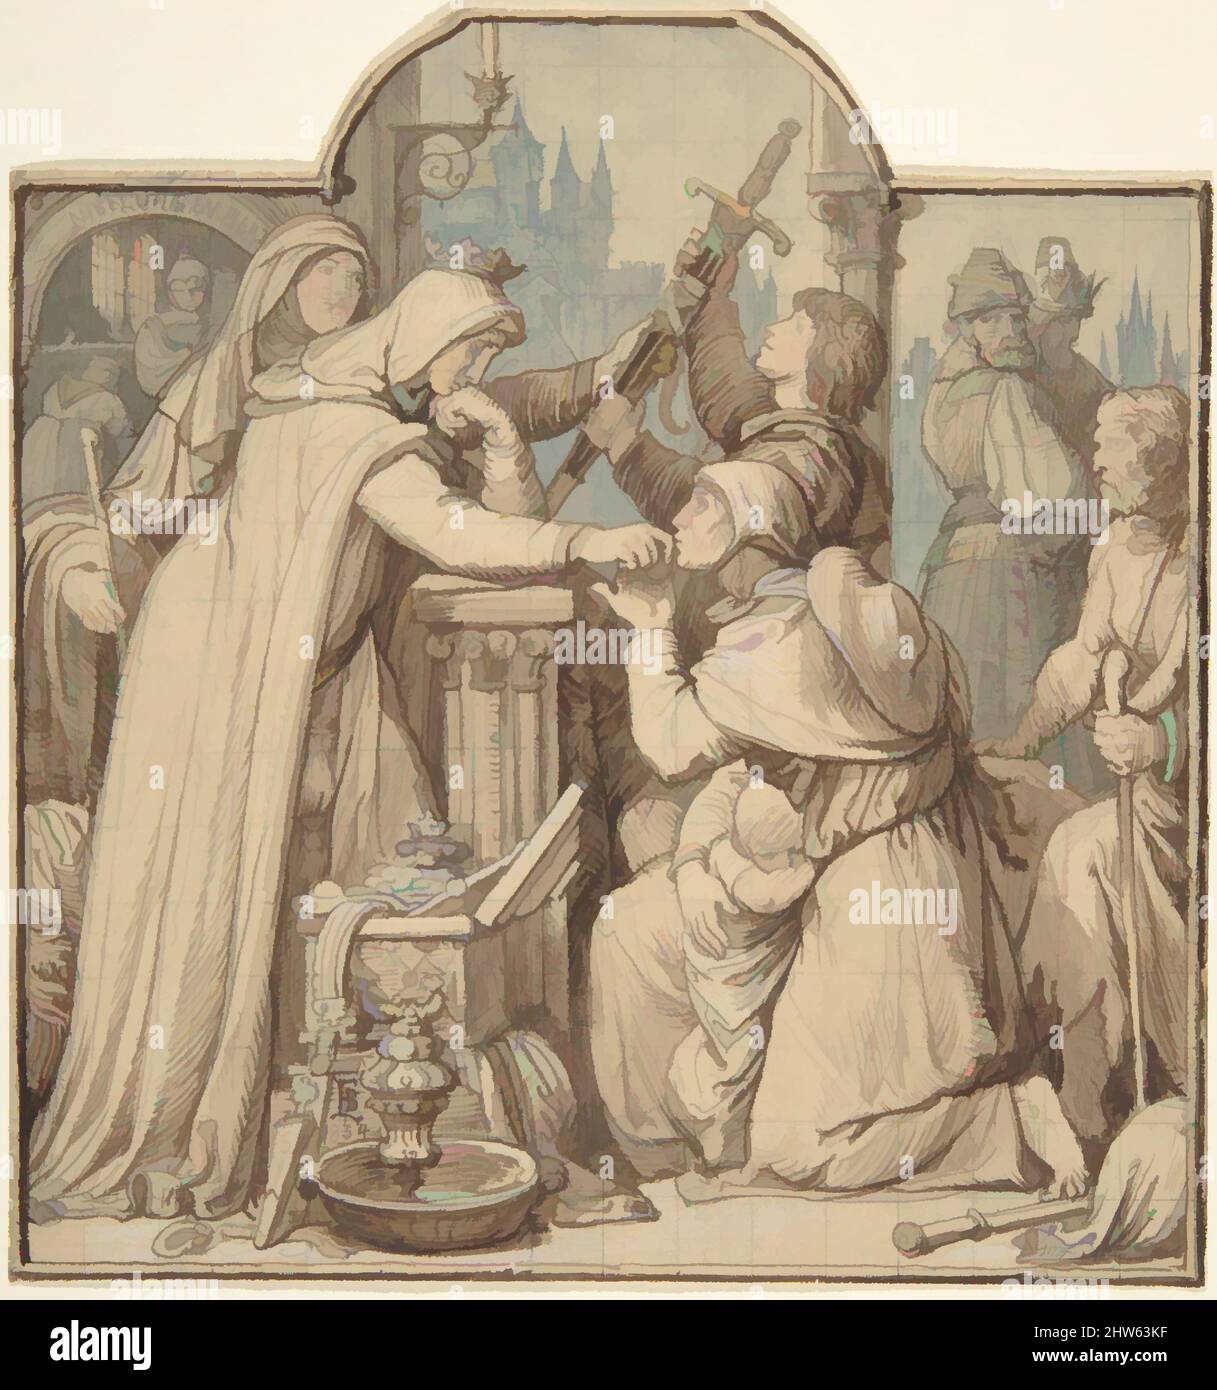 Art inspired by Kriemhild, in Mourning over Siegfried, Handing Out Treasures from the Nibelungen Hoard, 1854, Pen and brown ink over pencil with brown and gray wash, sheet: 6 x 5 11/16 in. (15.2 x 14.4 cm), Drawings, Eduard Julius Friedrich Bendemann (German, Berlin 1811–1889 Düsseldorf, Classic works modernized by Artotop with a splash of modernity. Shapes, color and value, eye-catching visual impact on art. Emotions through freedom of artworks in a contemporary way. A timeless message pursuing a wildly creative new direction. Artists turning to the digital medium and creating the Artotop NFT Stock Photo